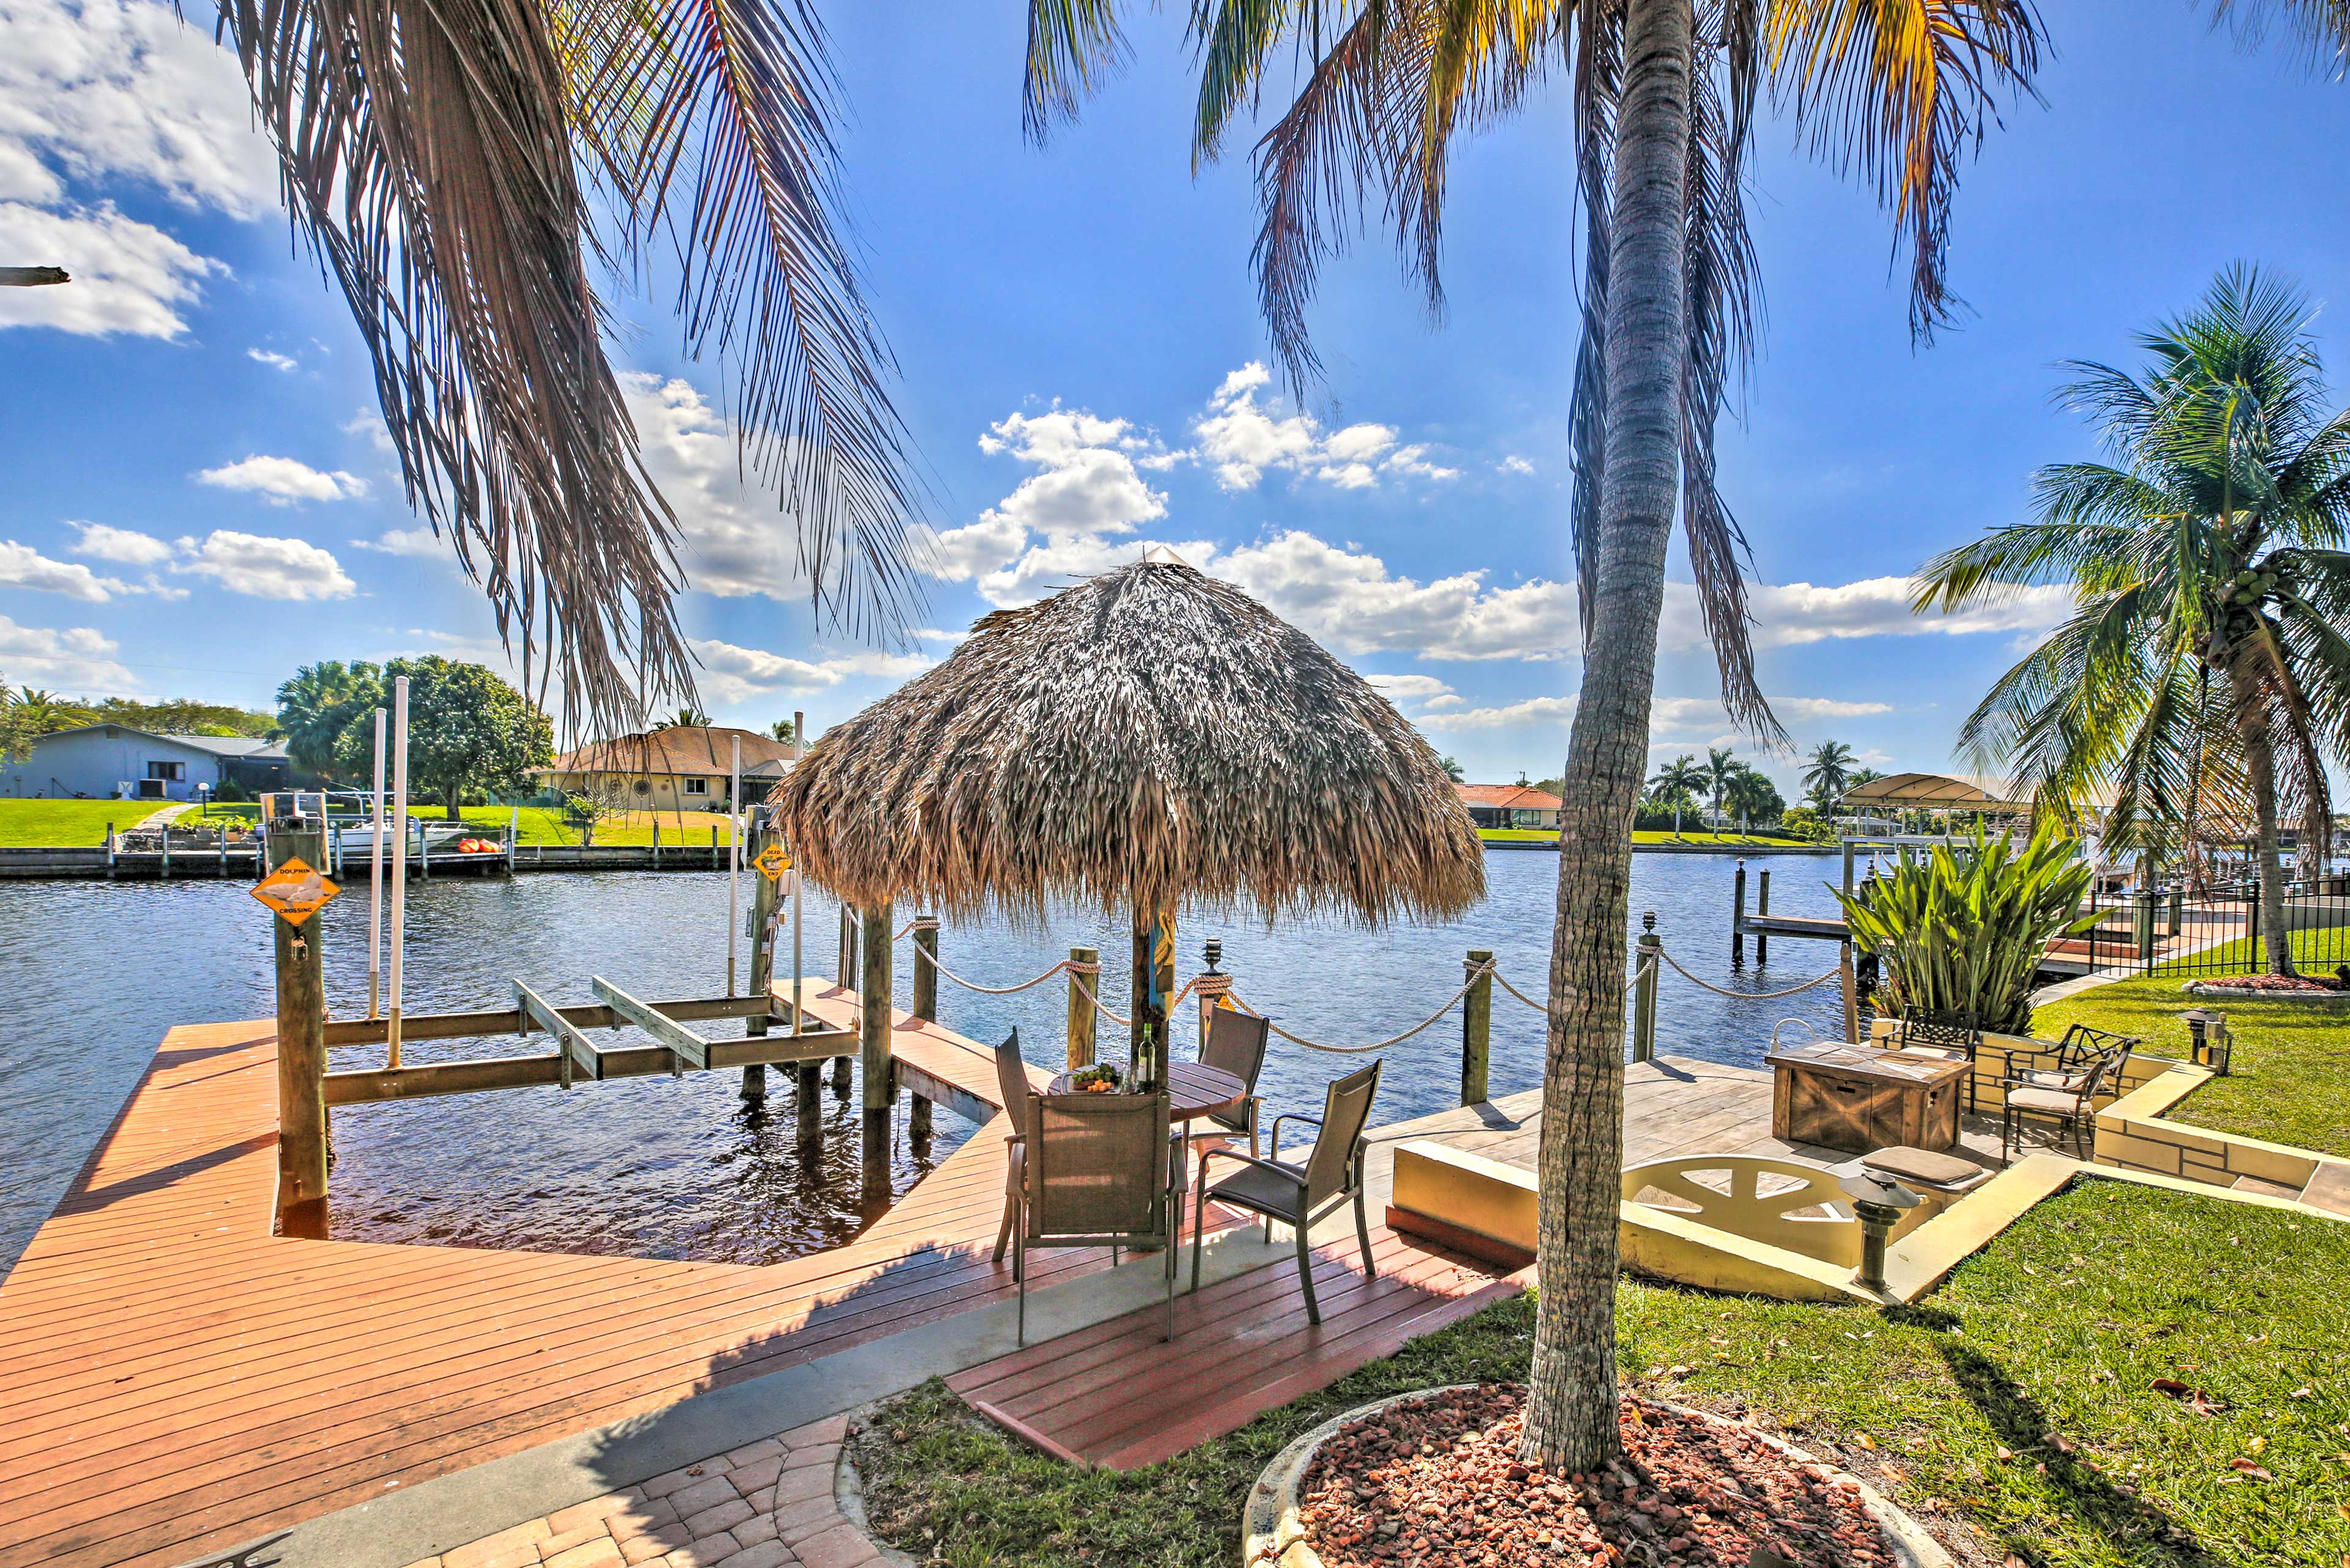 Private Dock | Beach Chairs & Towels